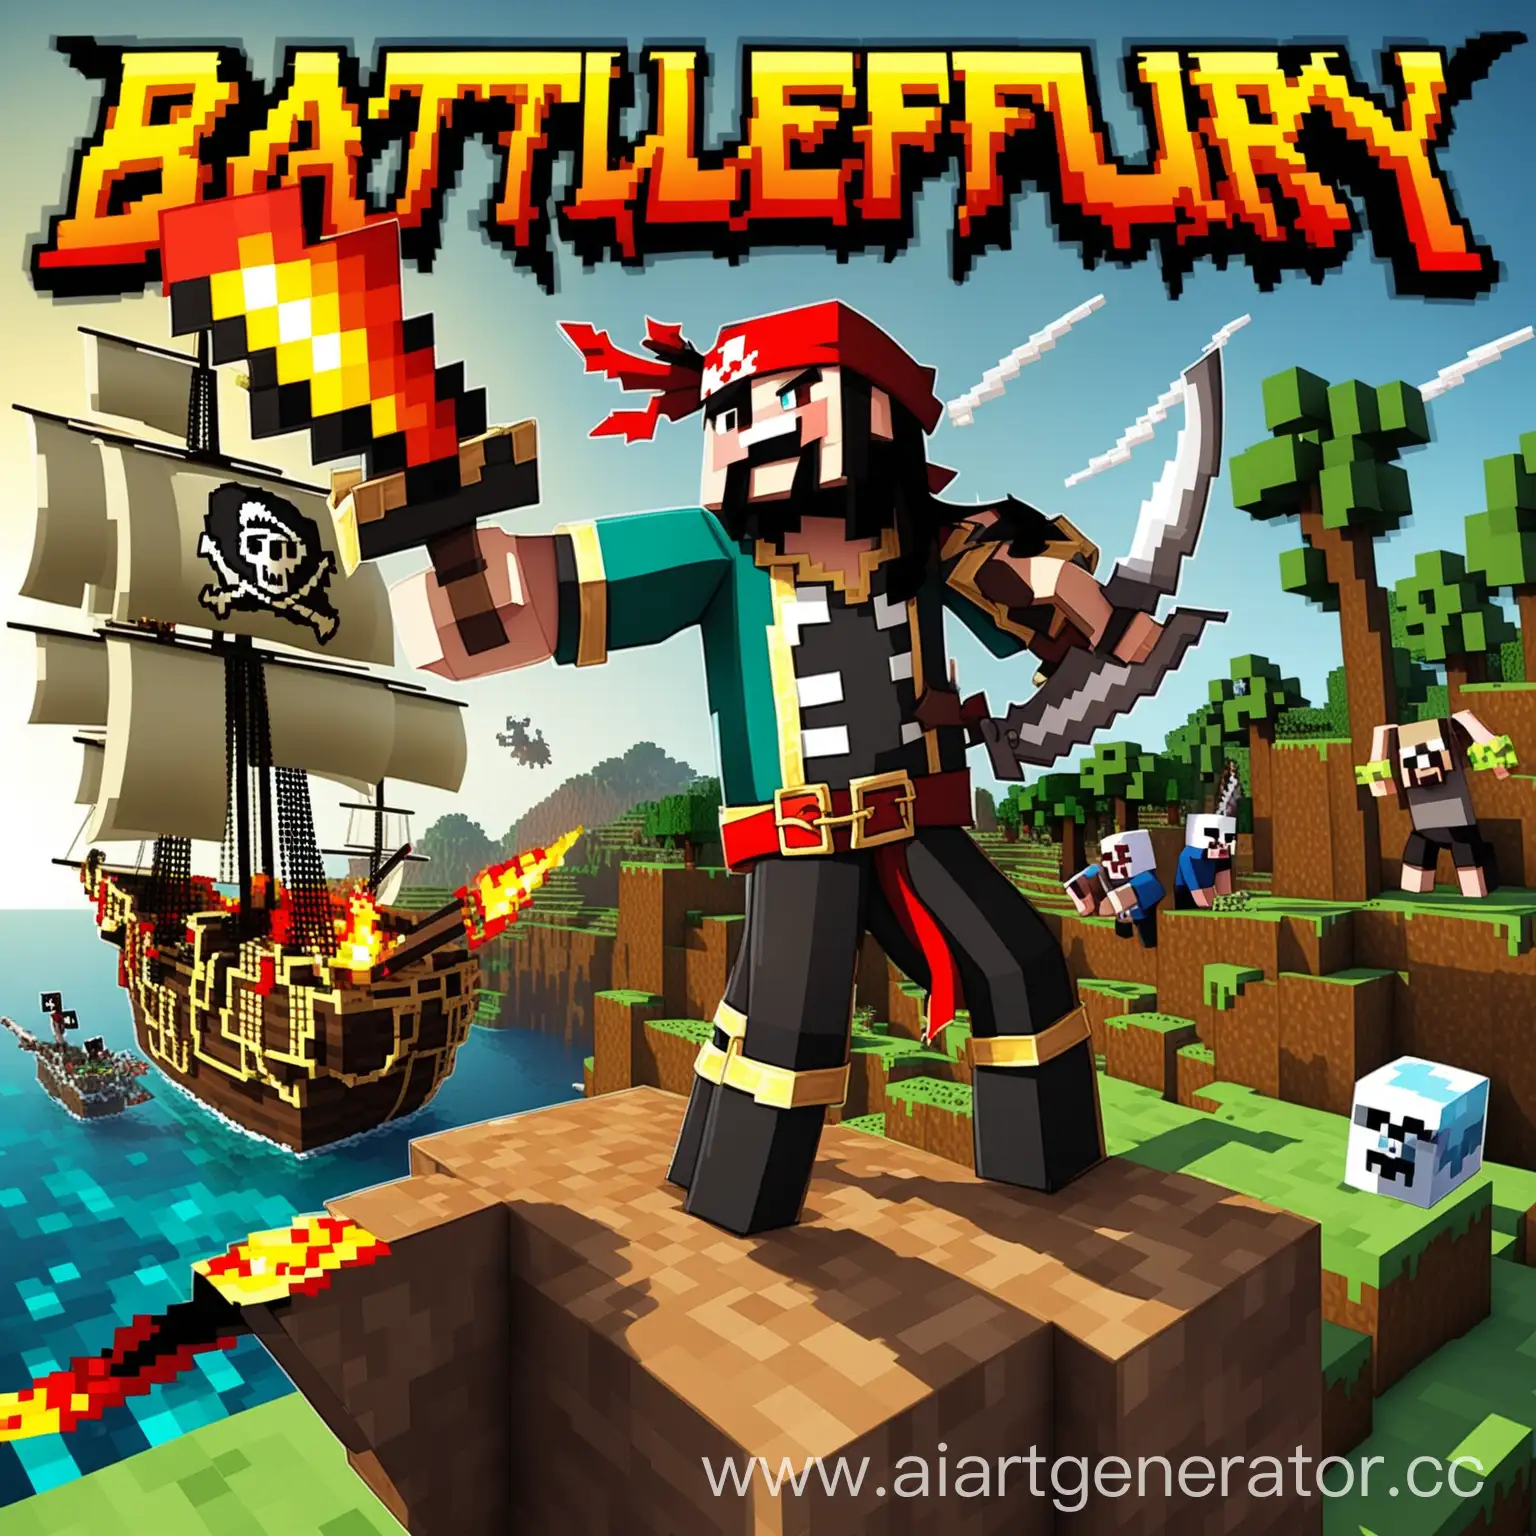 Epic-Pirate-Battle-with-Minecraftstyle-Ships-and-Weapons